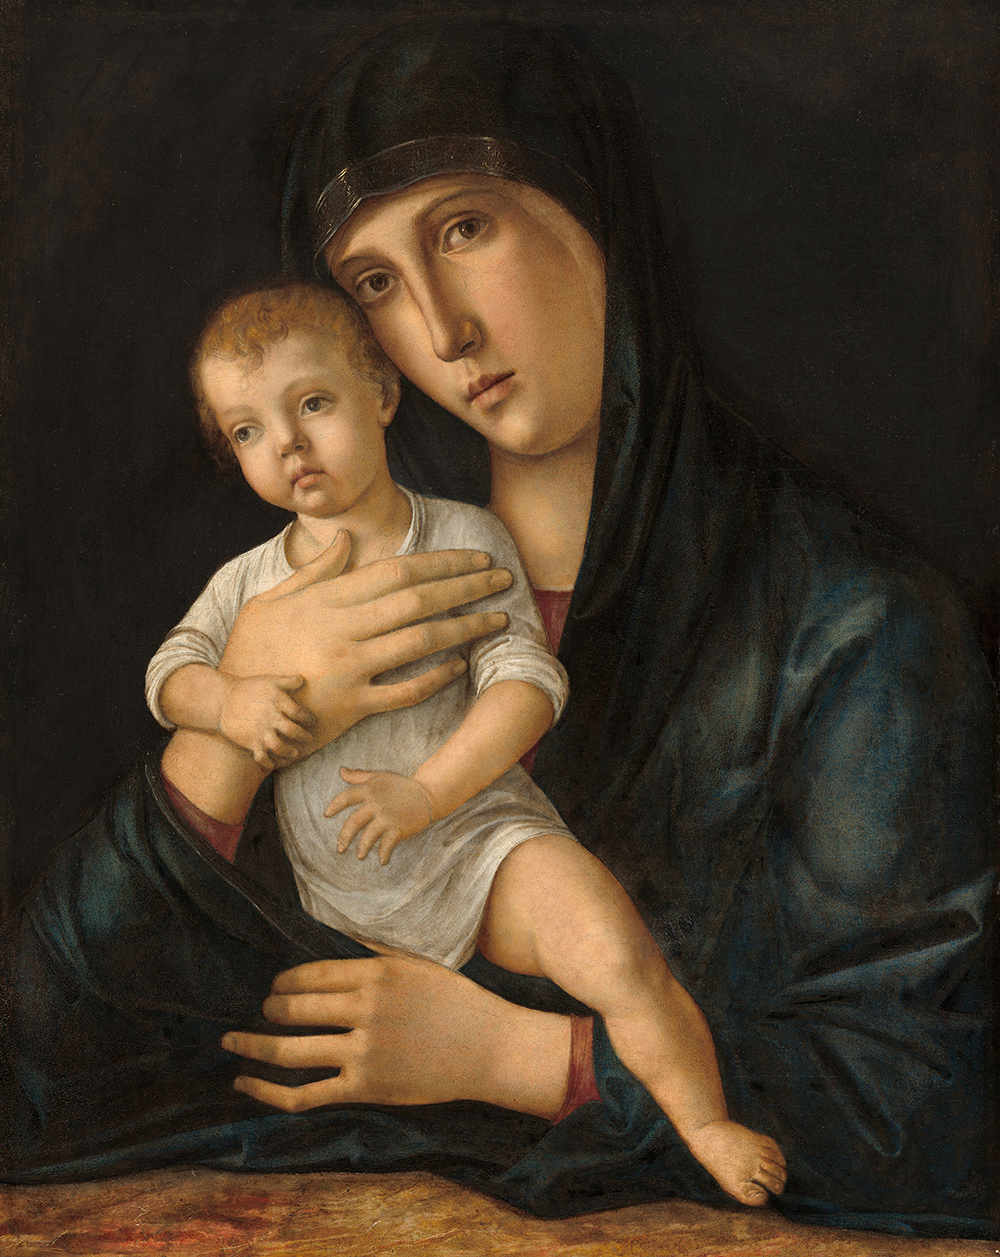 Painting of the Madonna staring directly at the viewer. She is holding a child.